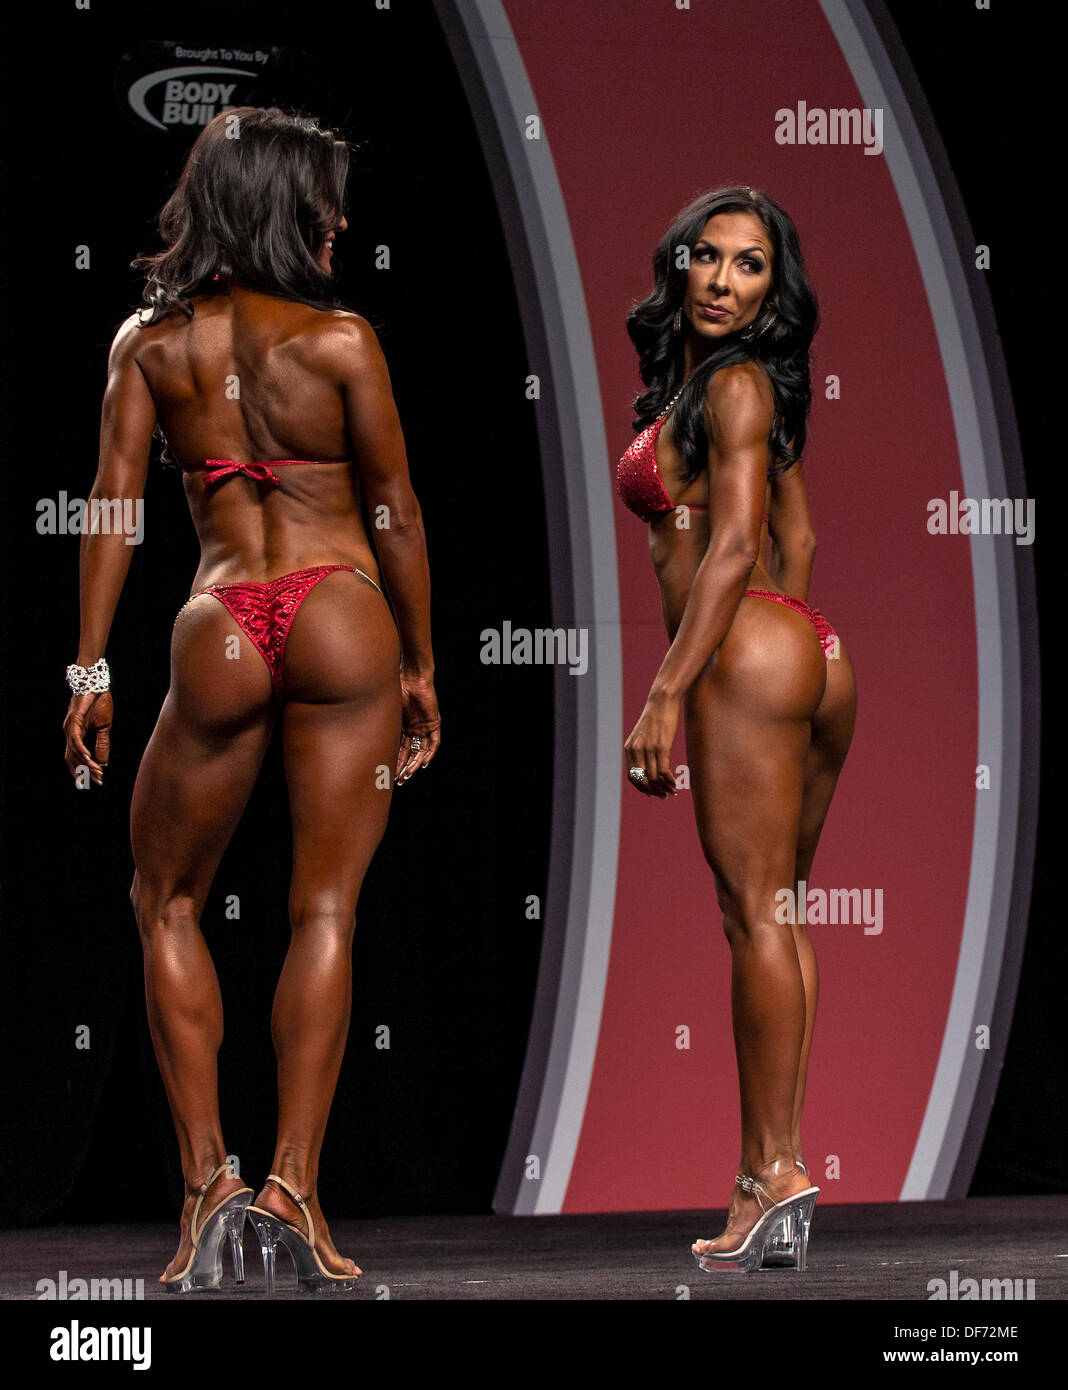 6 Tips For First Time Bikini Competitors | Team Dee's